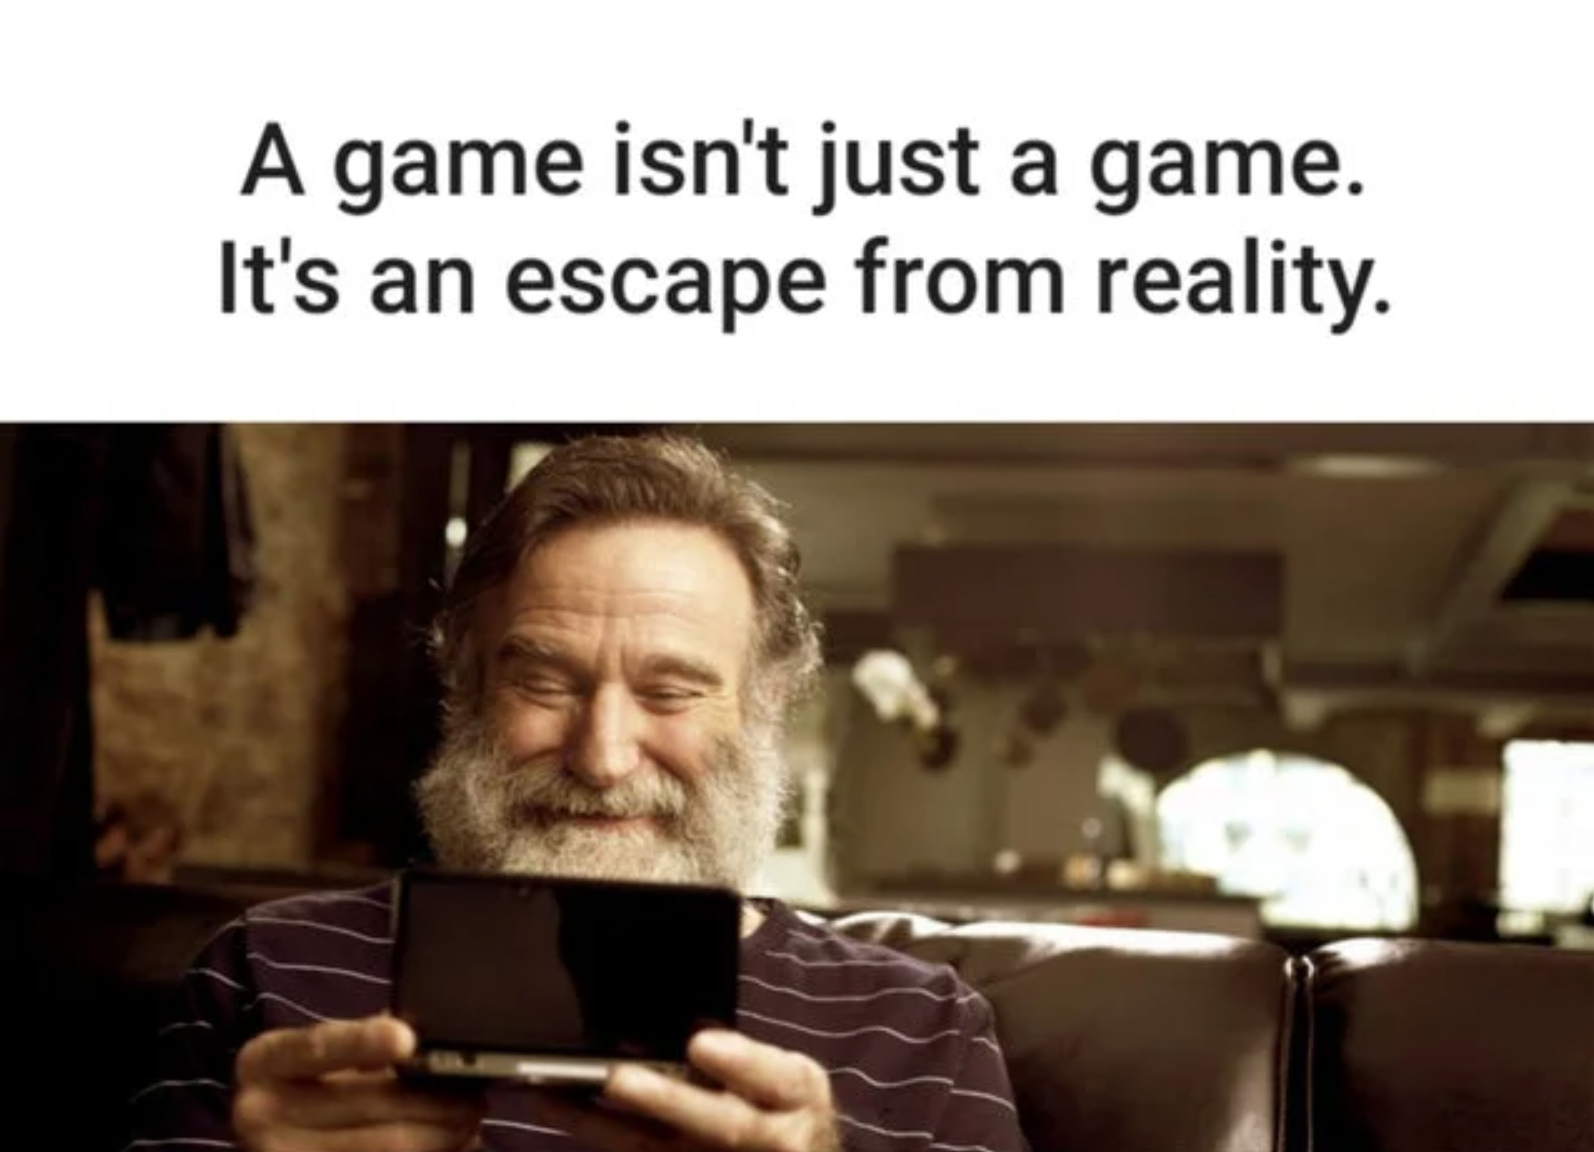 funny gaming memes - gaming meme - A game isn't just a game. It's an escape from reality.